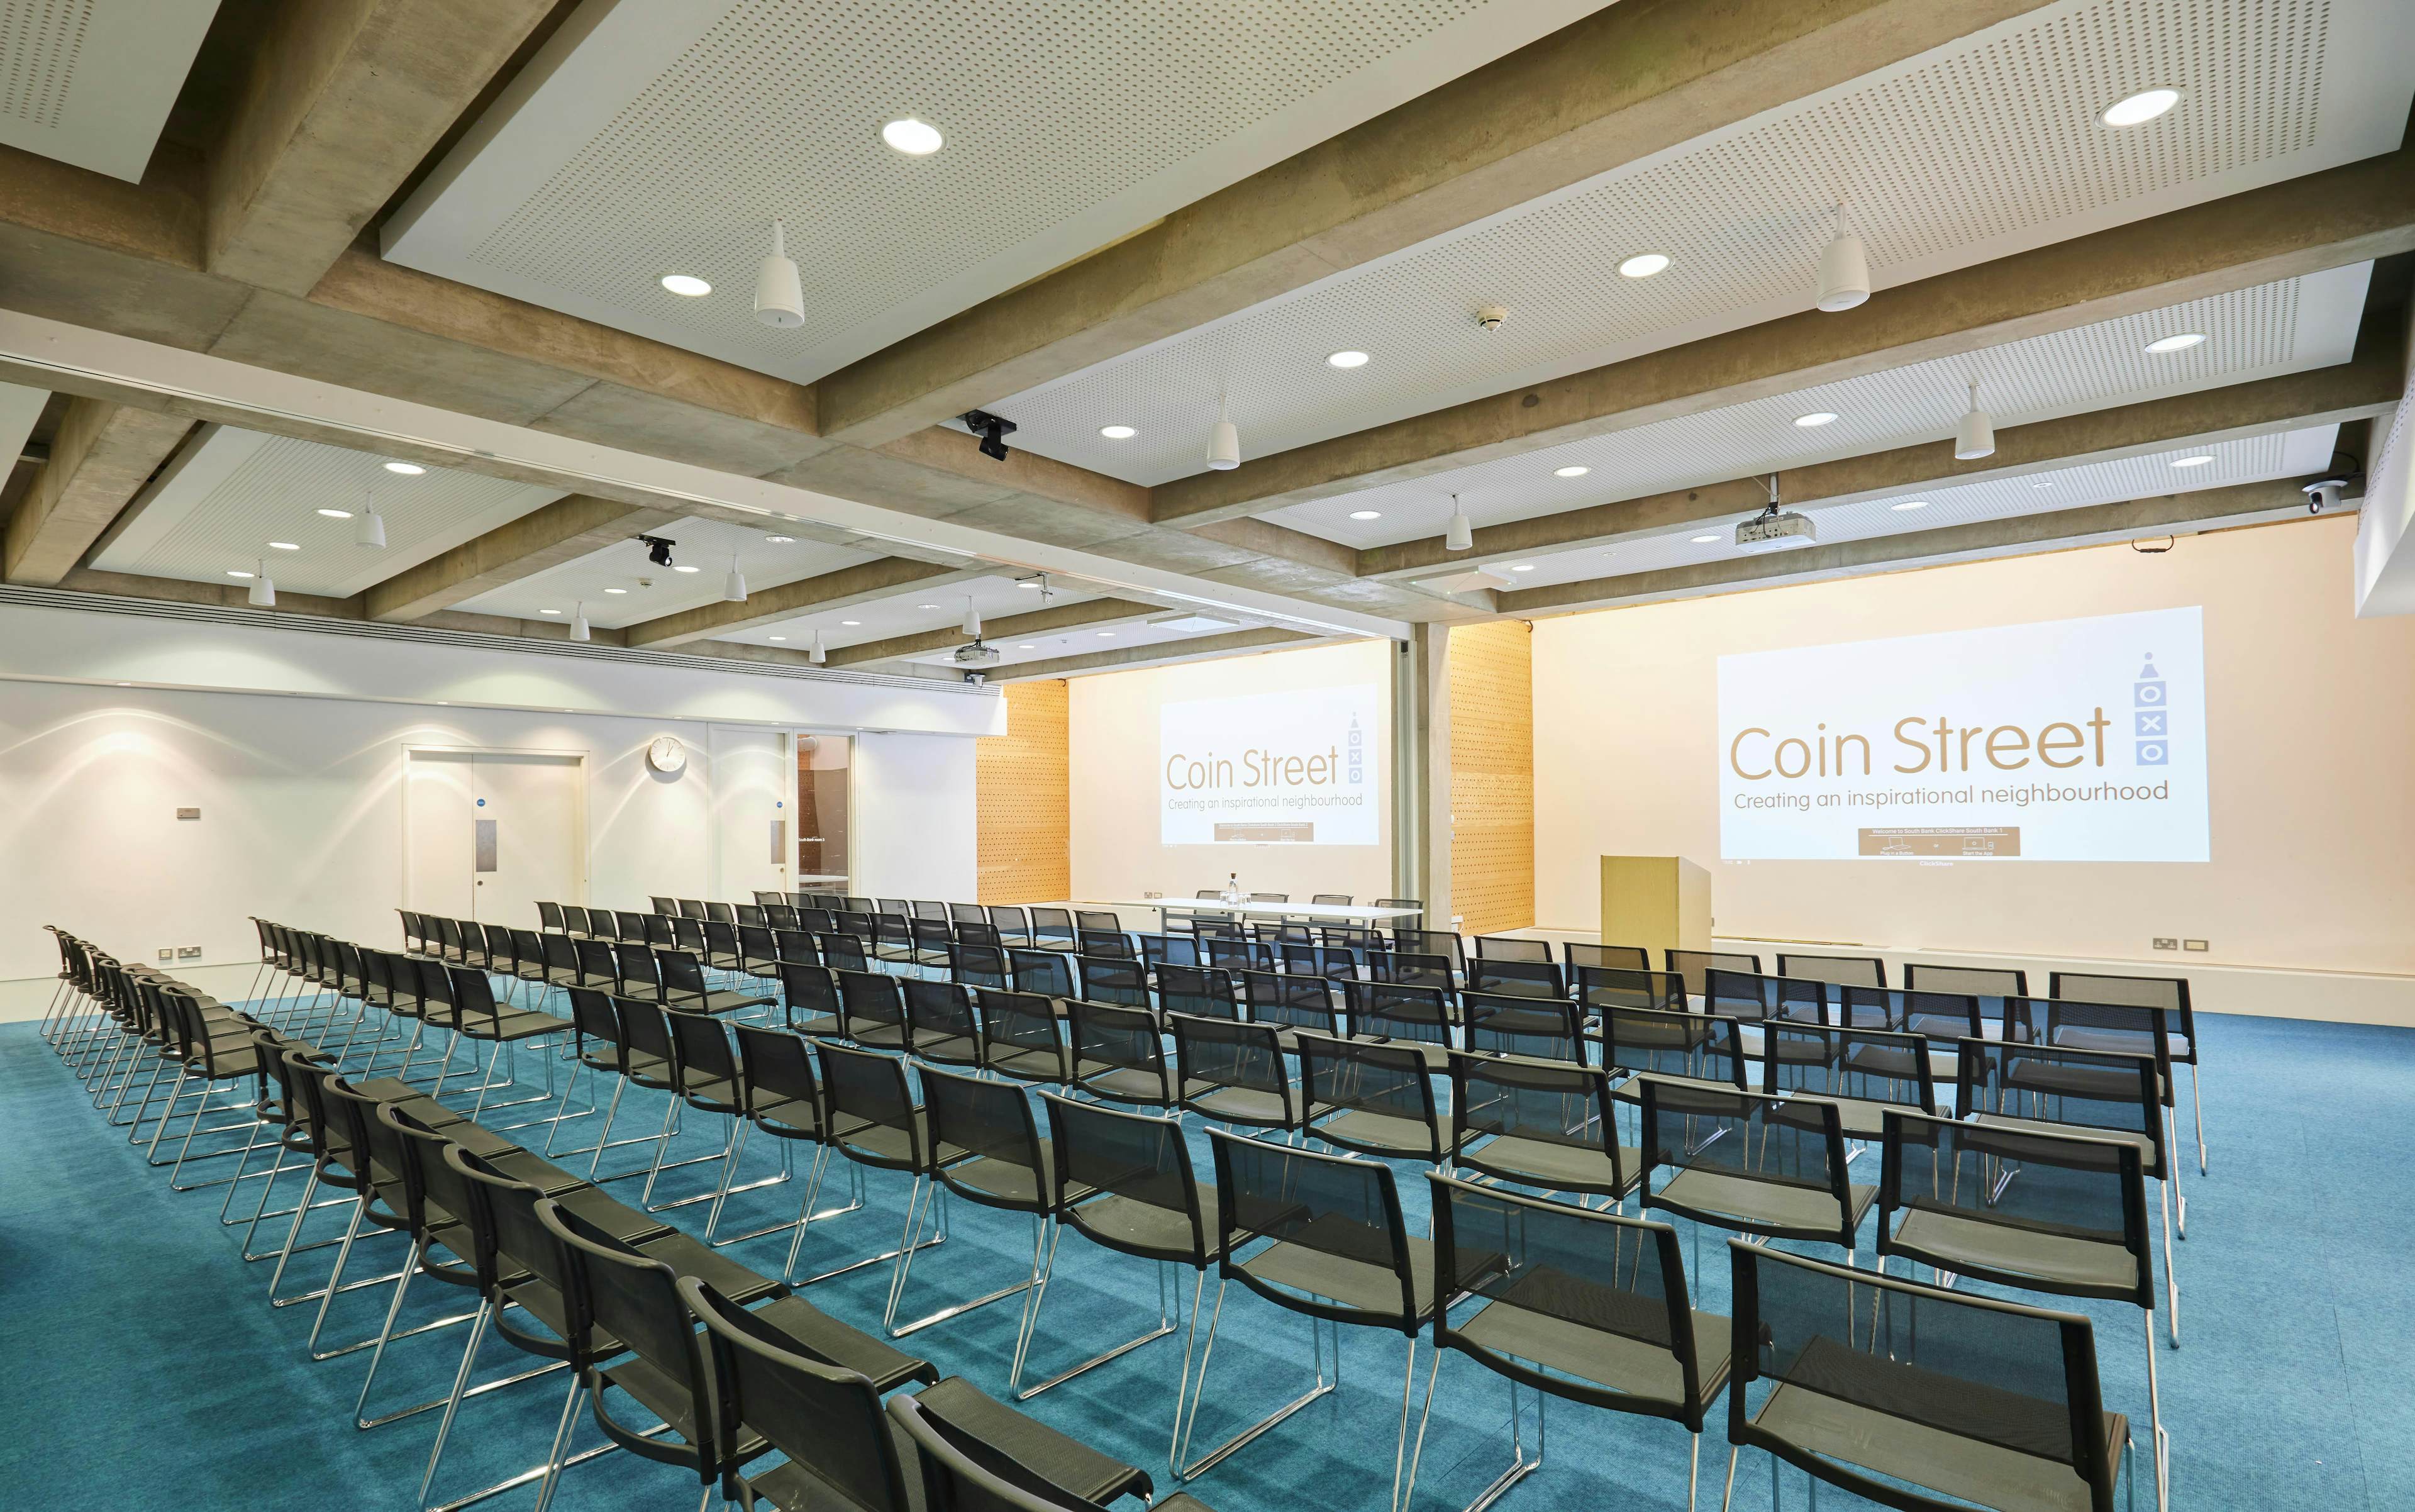 Coin Street Conference Centre - South Bank Suite image 1